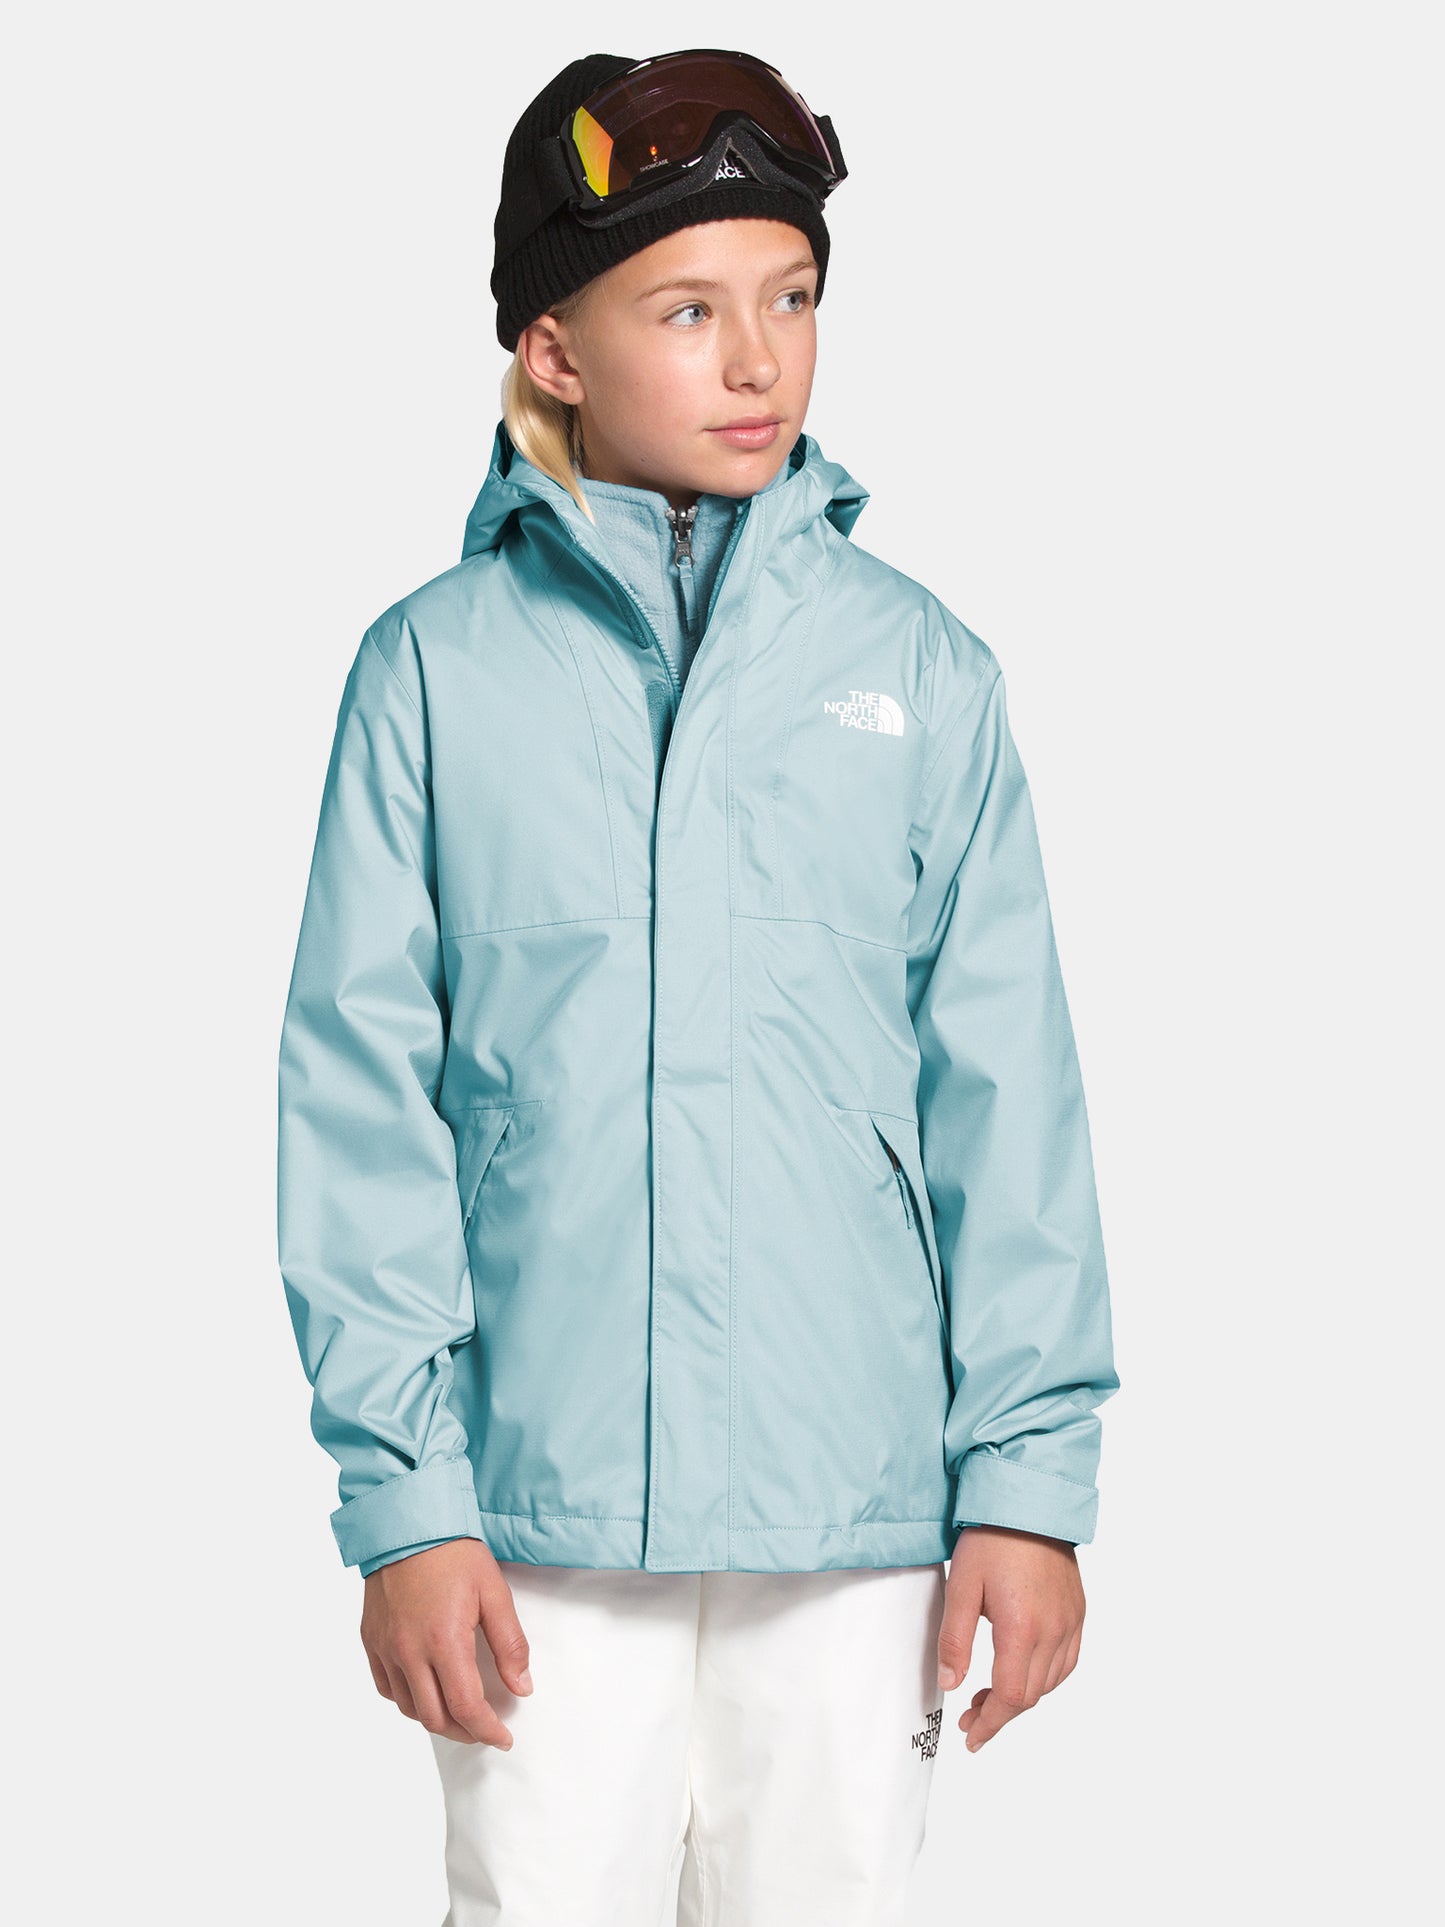 The North Face Girls' Mt. View Triclimate Jacket